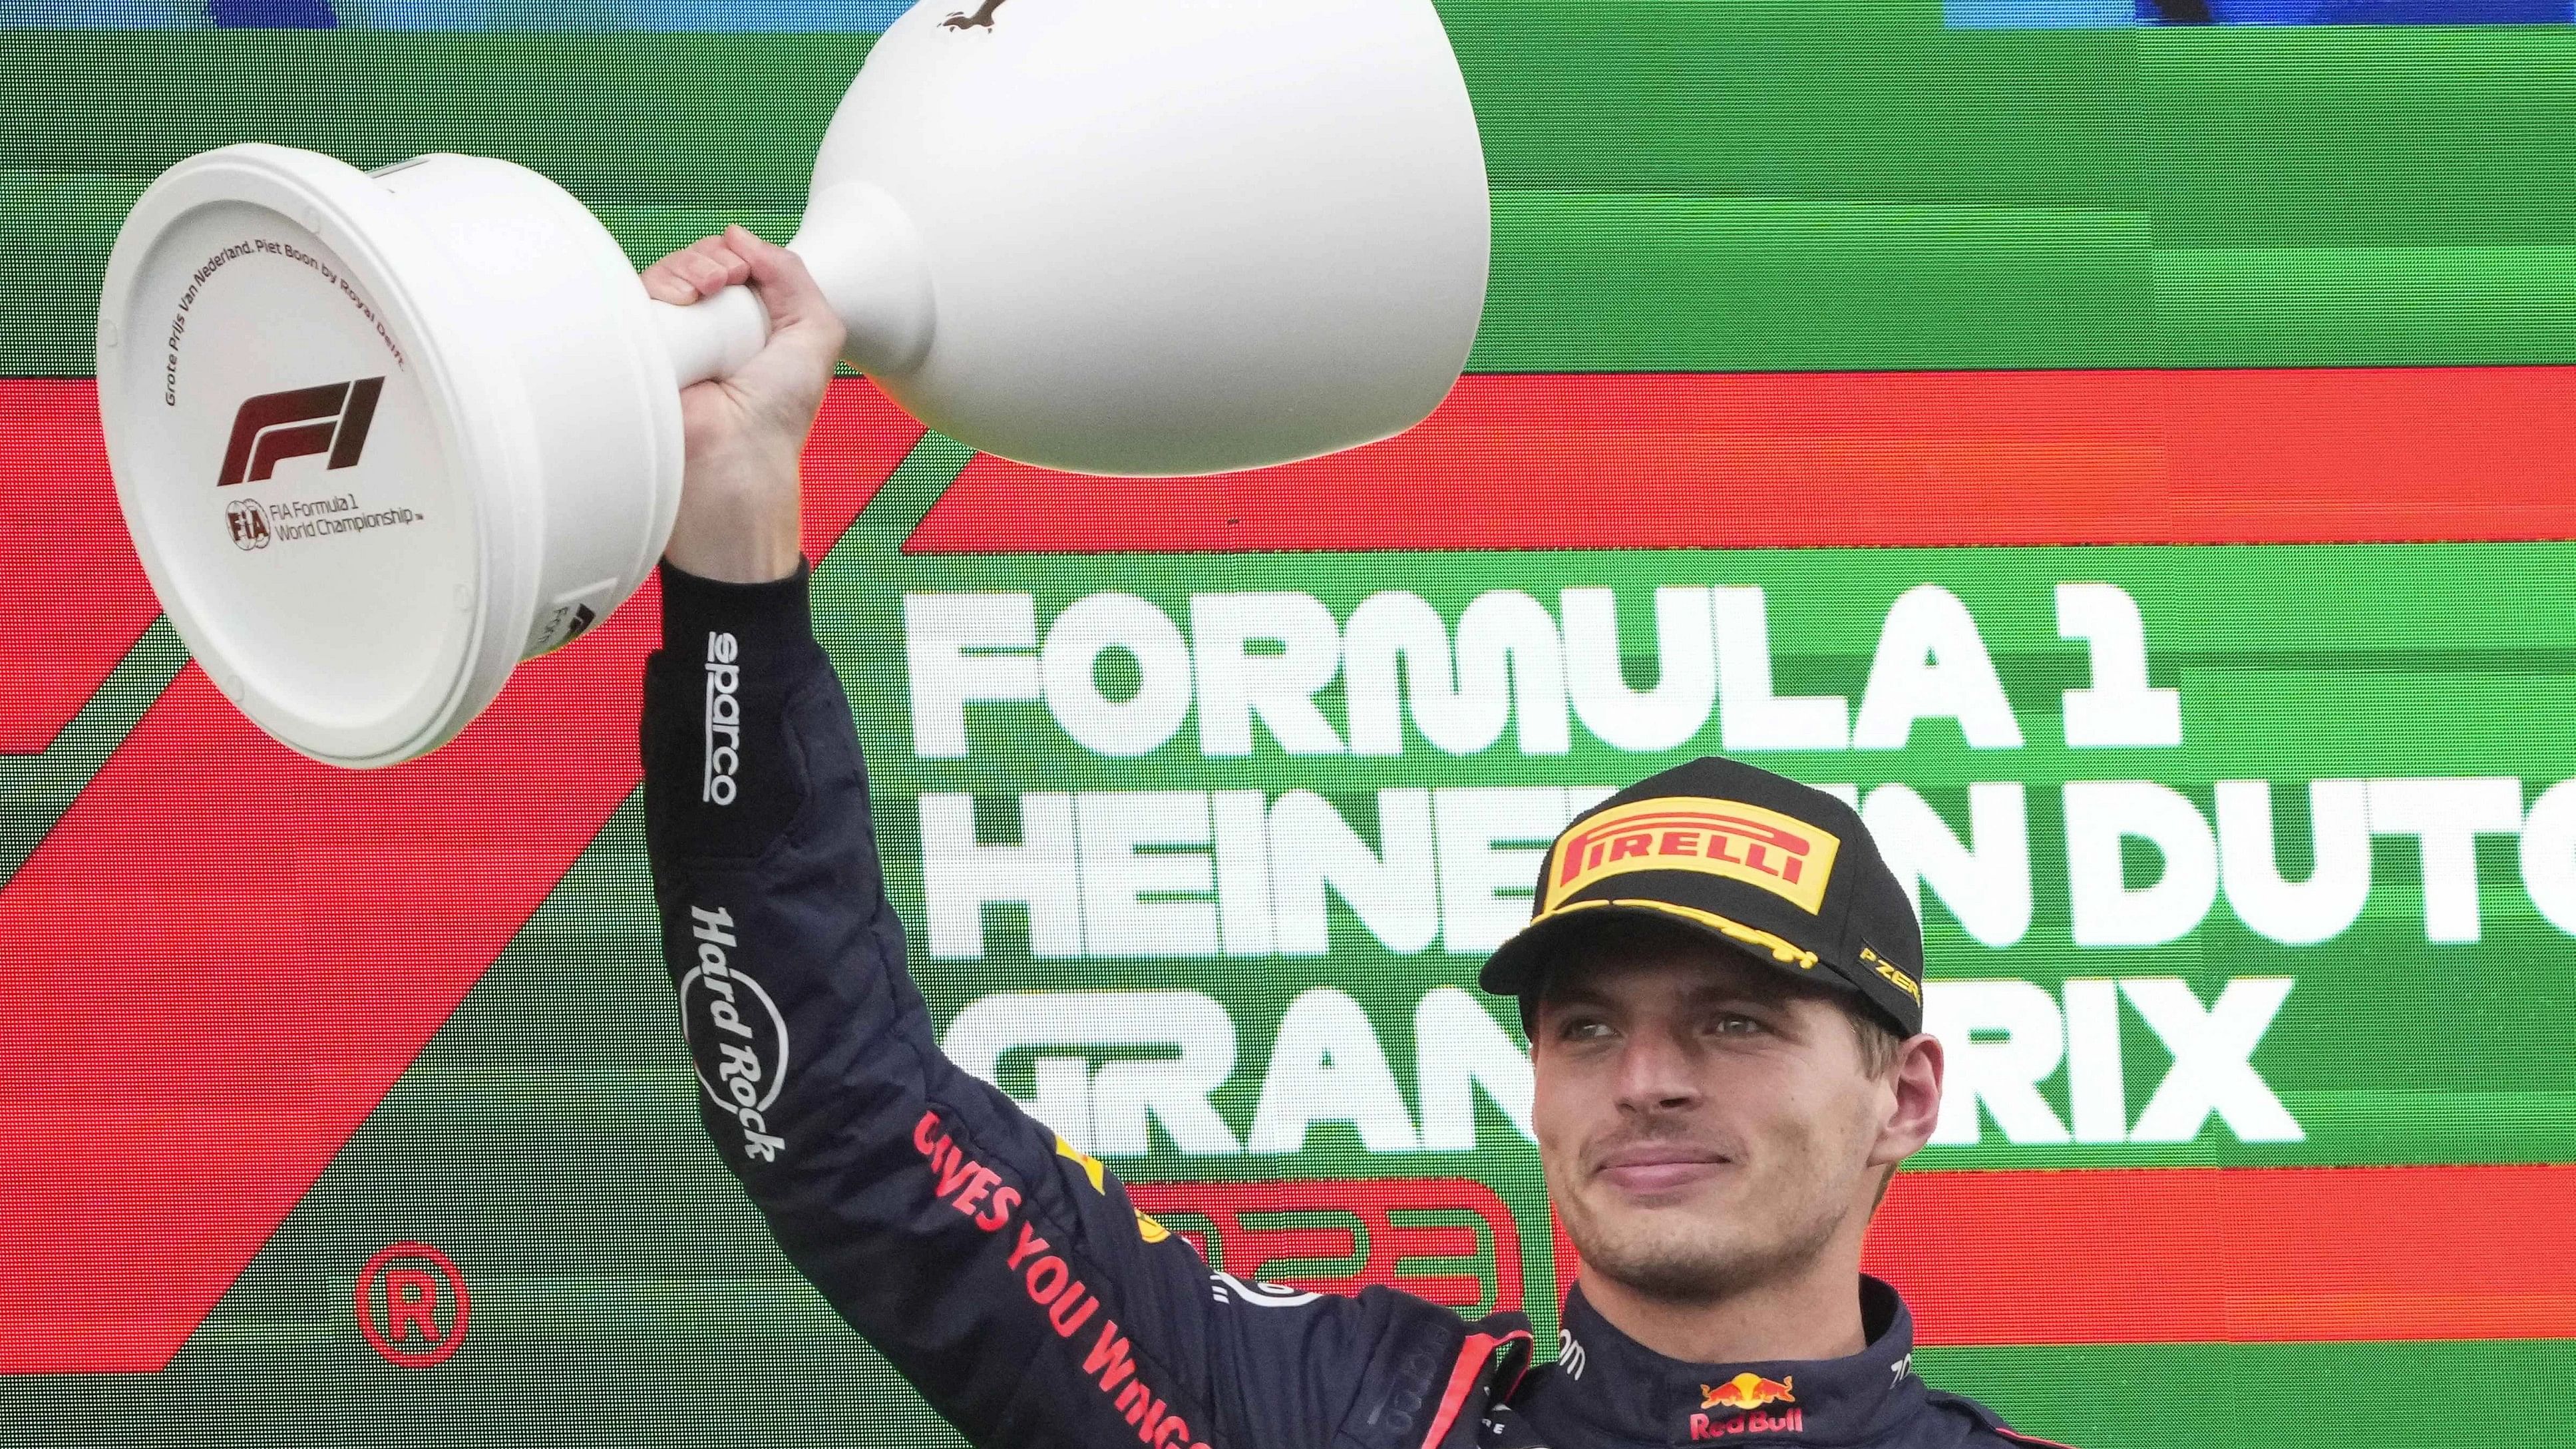 <div class="paragraphs"><p>Red Bull driver Max Verstappen of the Netherlands celebrates winning the Formula One Dutch Grand Prix auto race.</p></div>